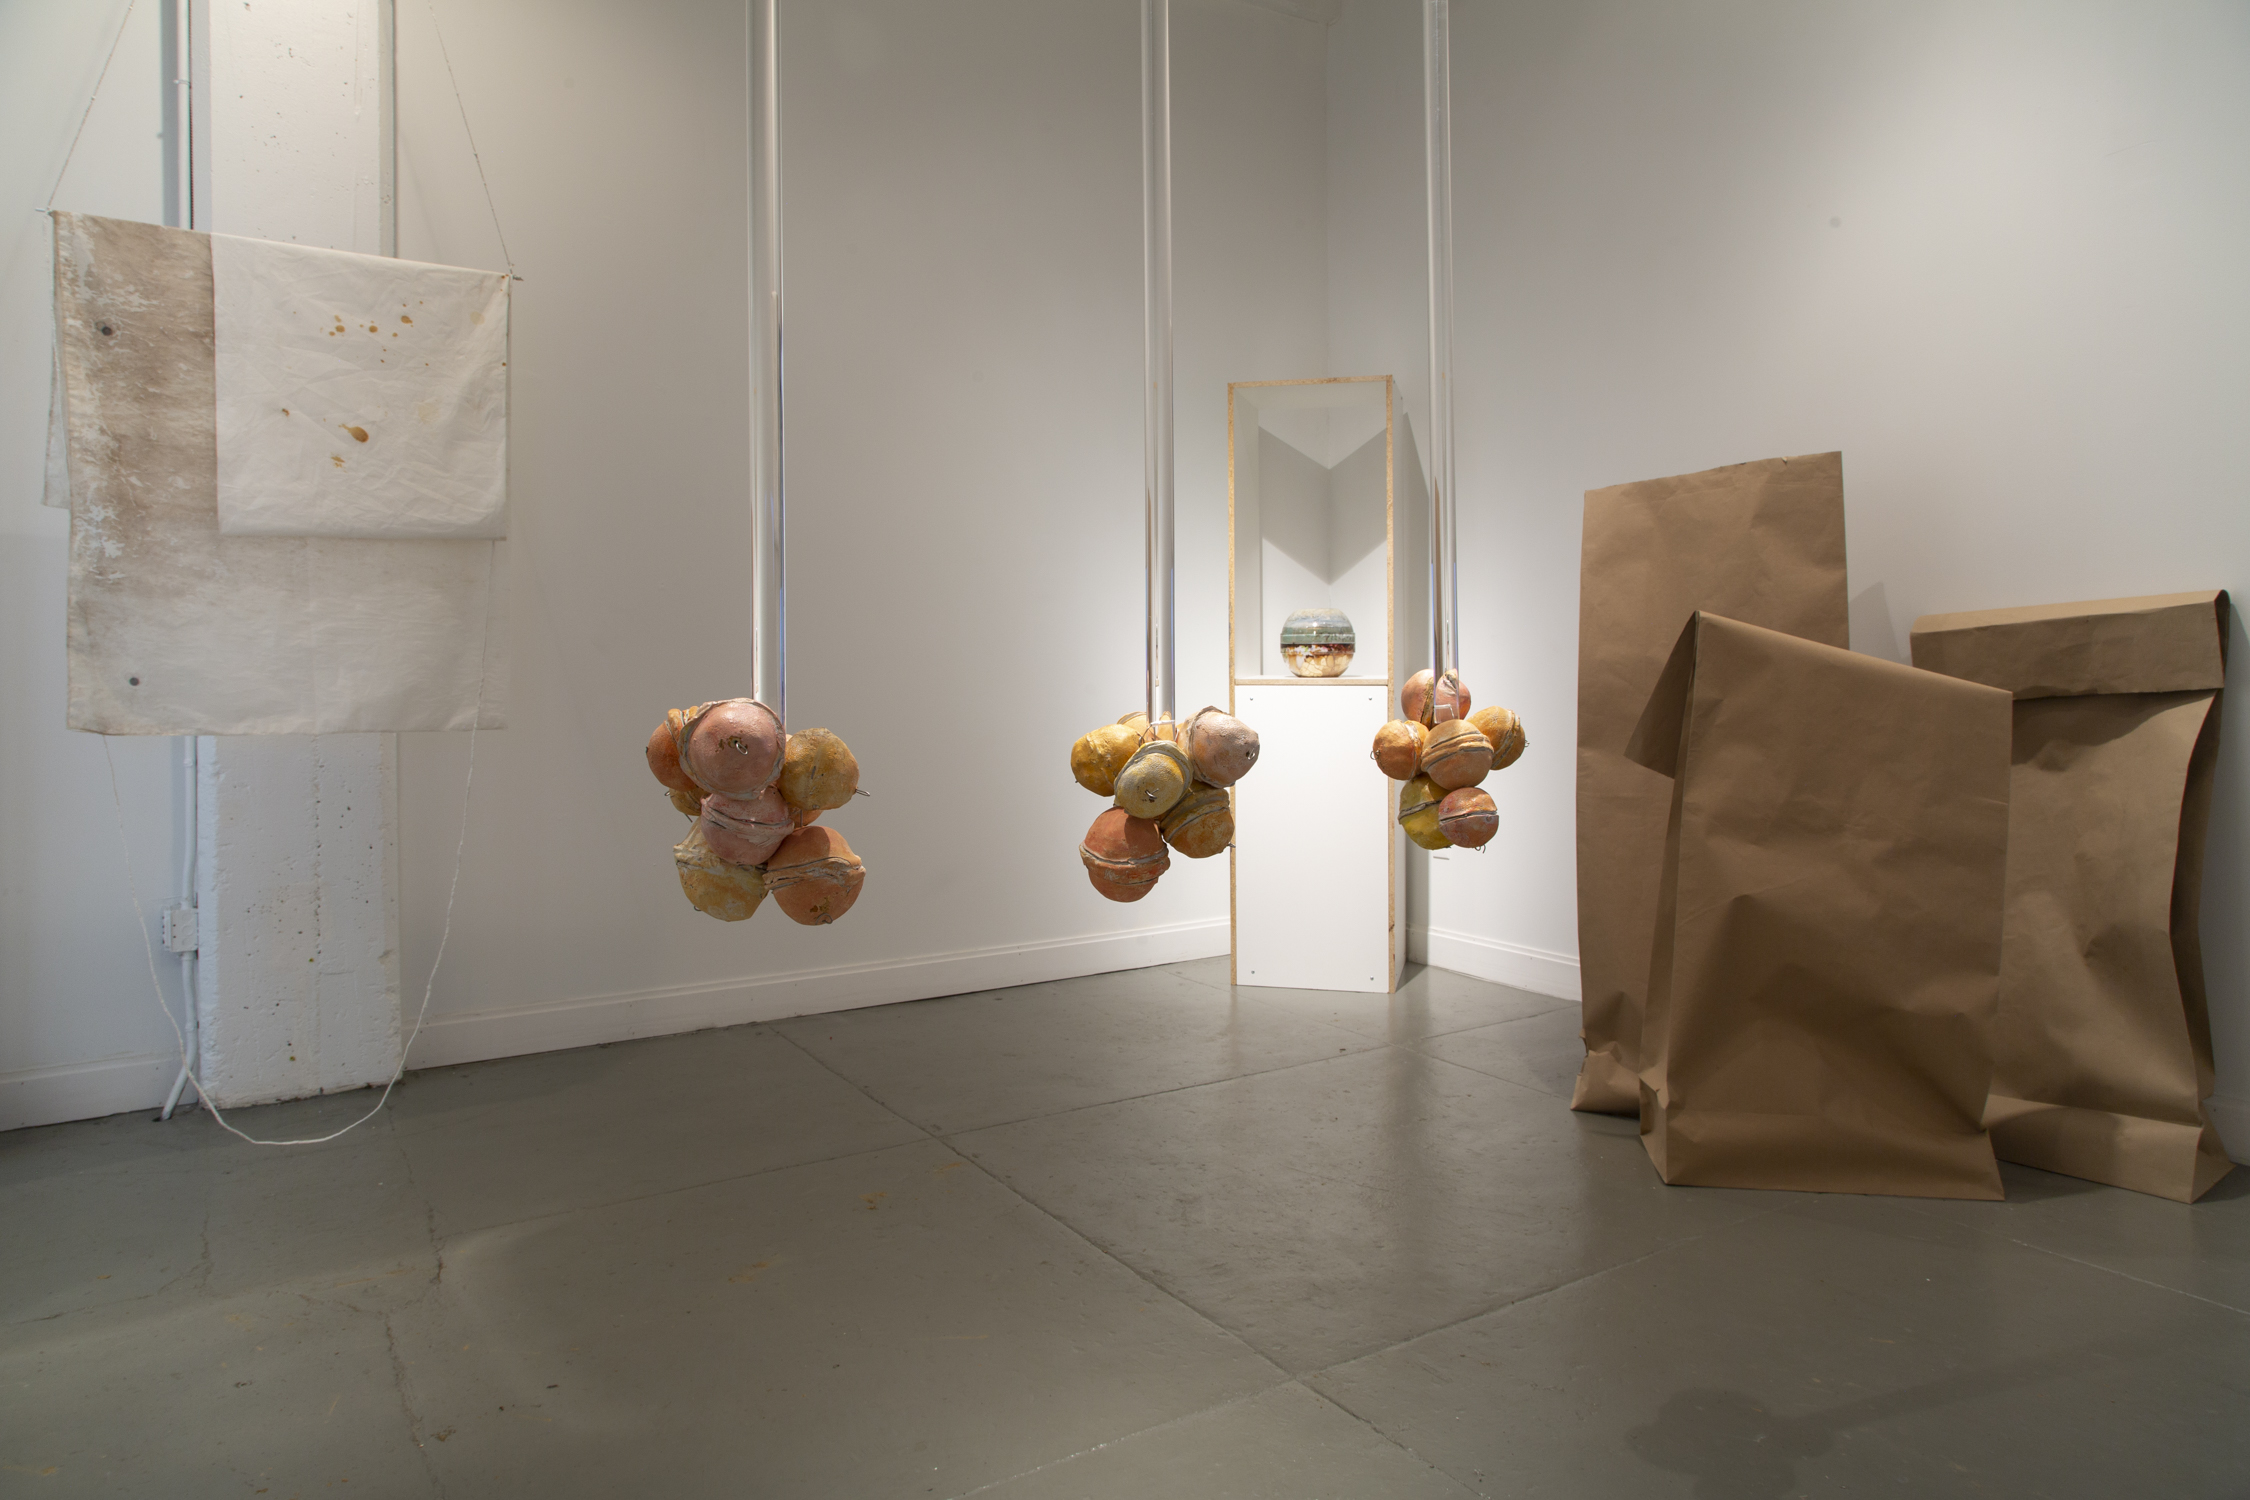 Balls hang from ceiling with paper bags in the background